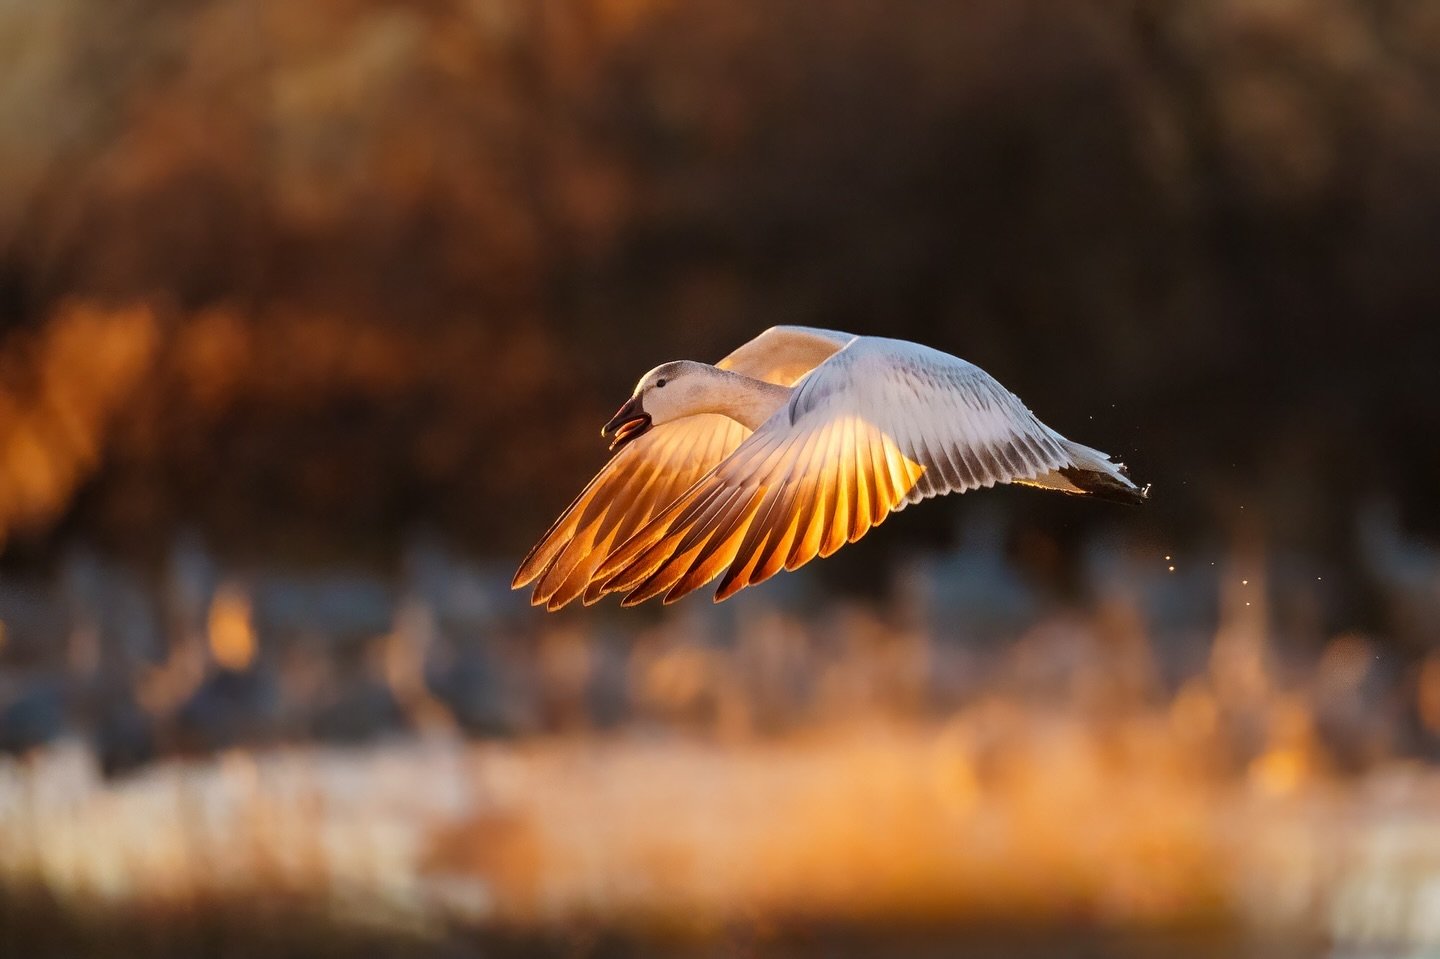 You get a break from eclipse images today.  I&rsquo;ve got plenty of images from trips over the last several months I never shared.  This is one of them.  This was taken at Bernarndo Wildlife Area in Bernardo, NM.  A snow goose taking off at first li